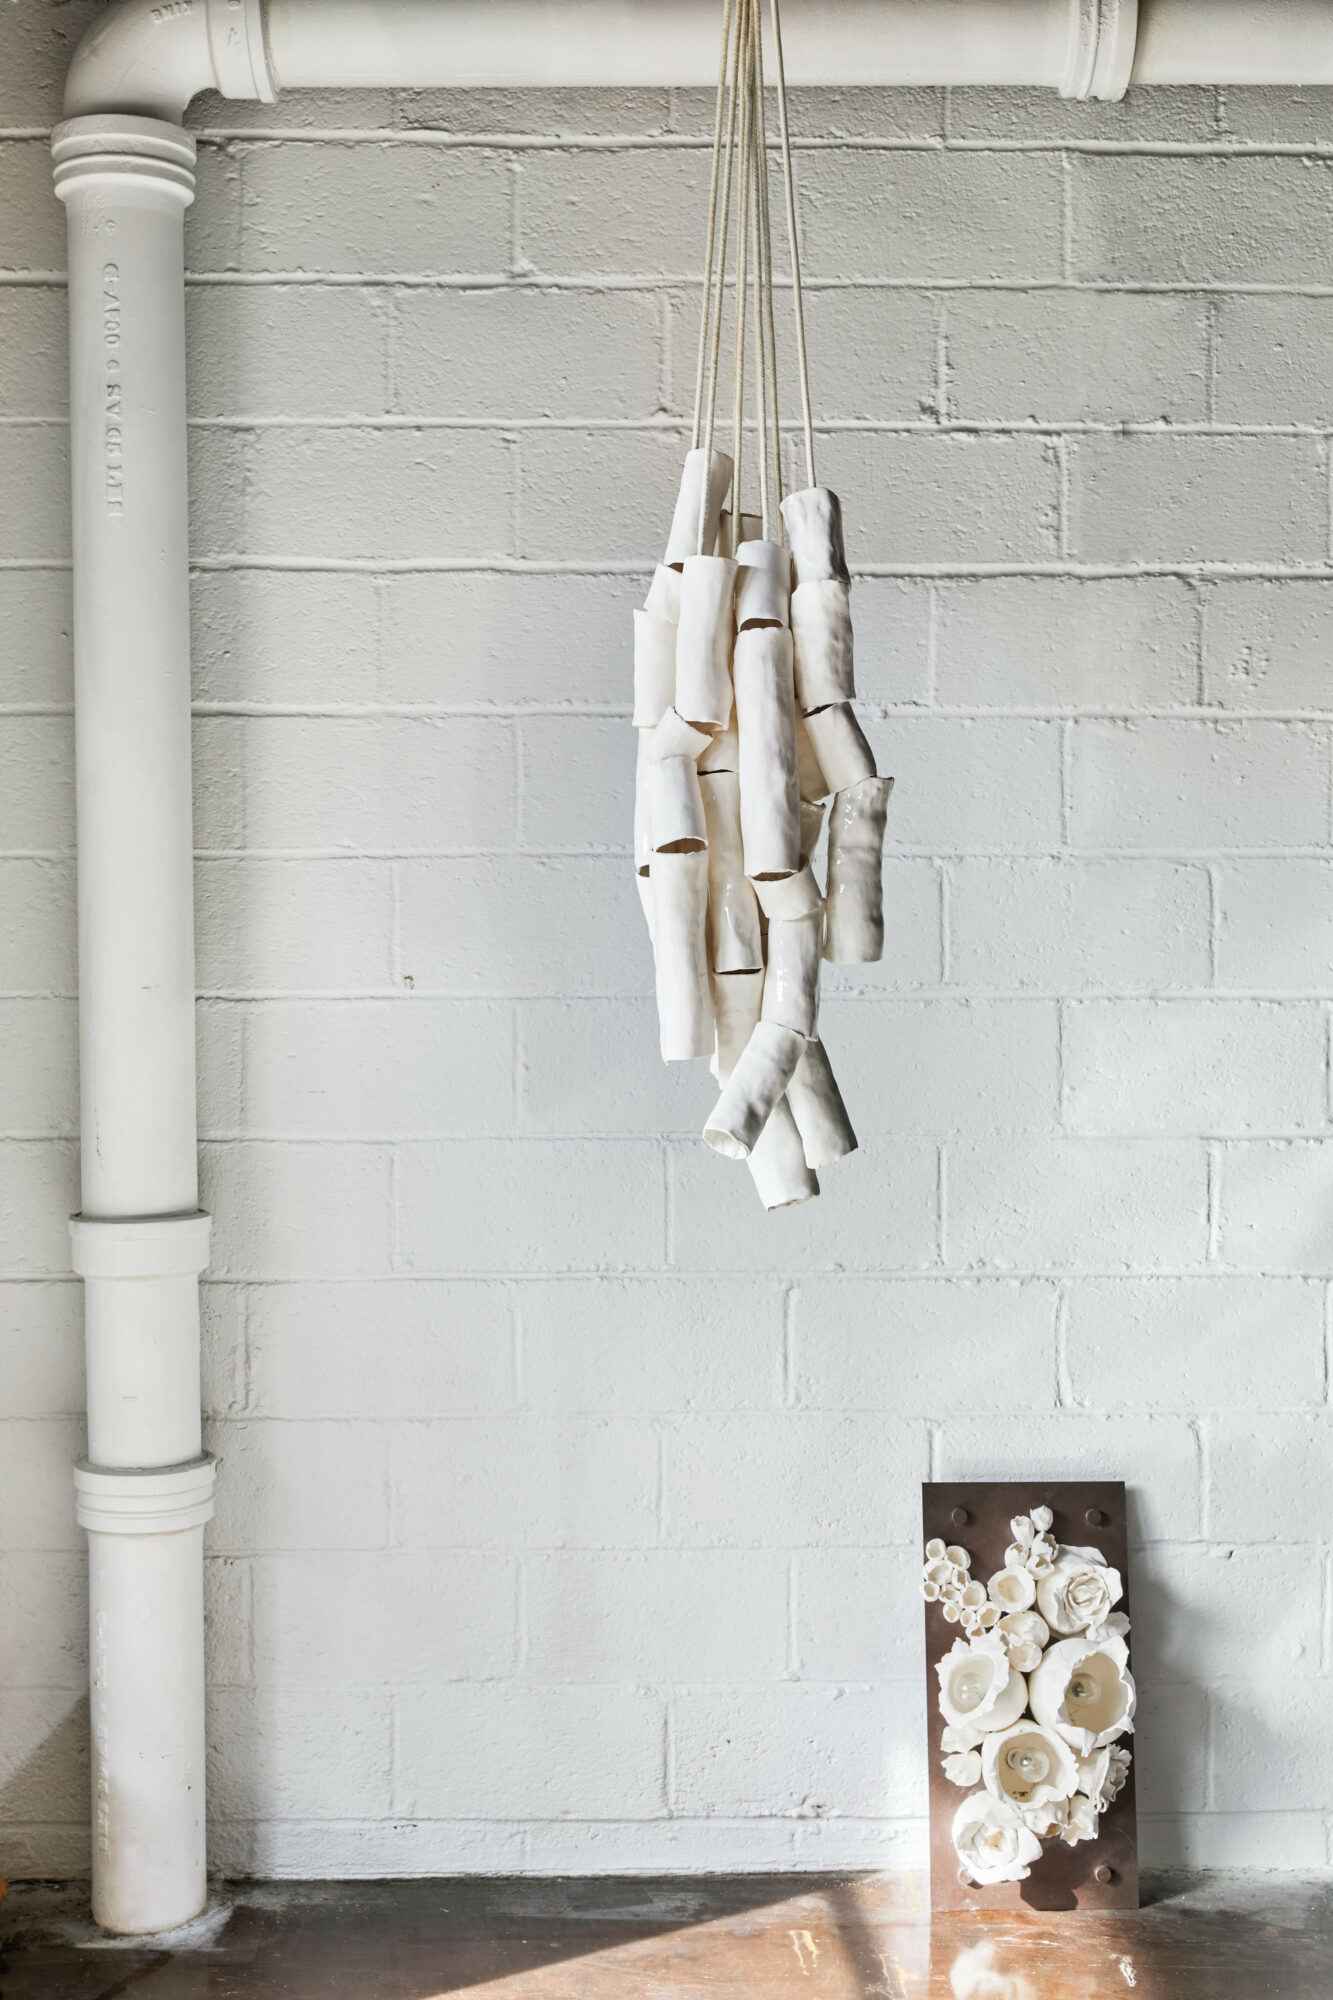 Stoneware sculpture hanging from the ceiling and a three-dimensional work leaning against the wall